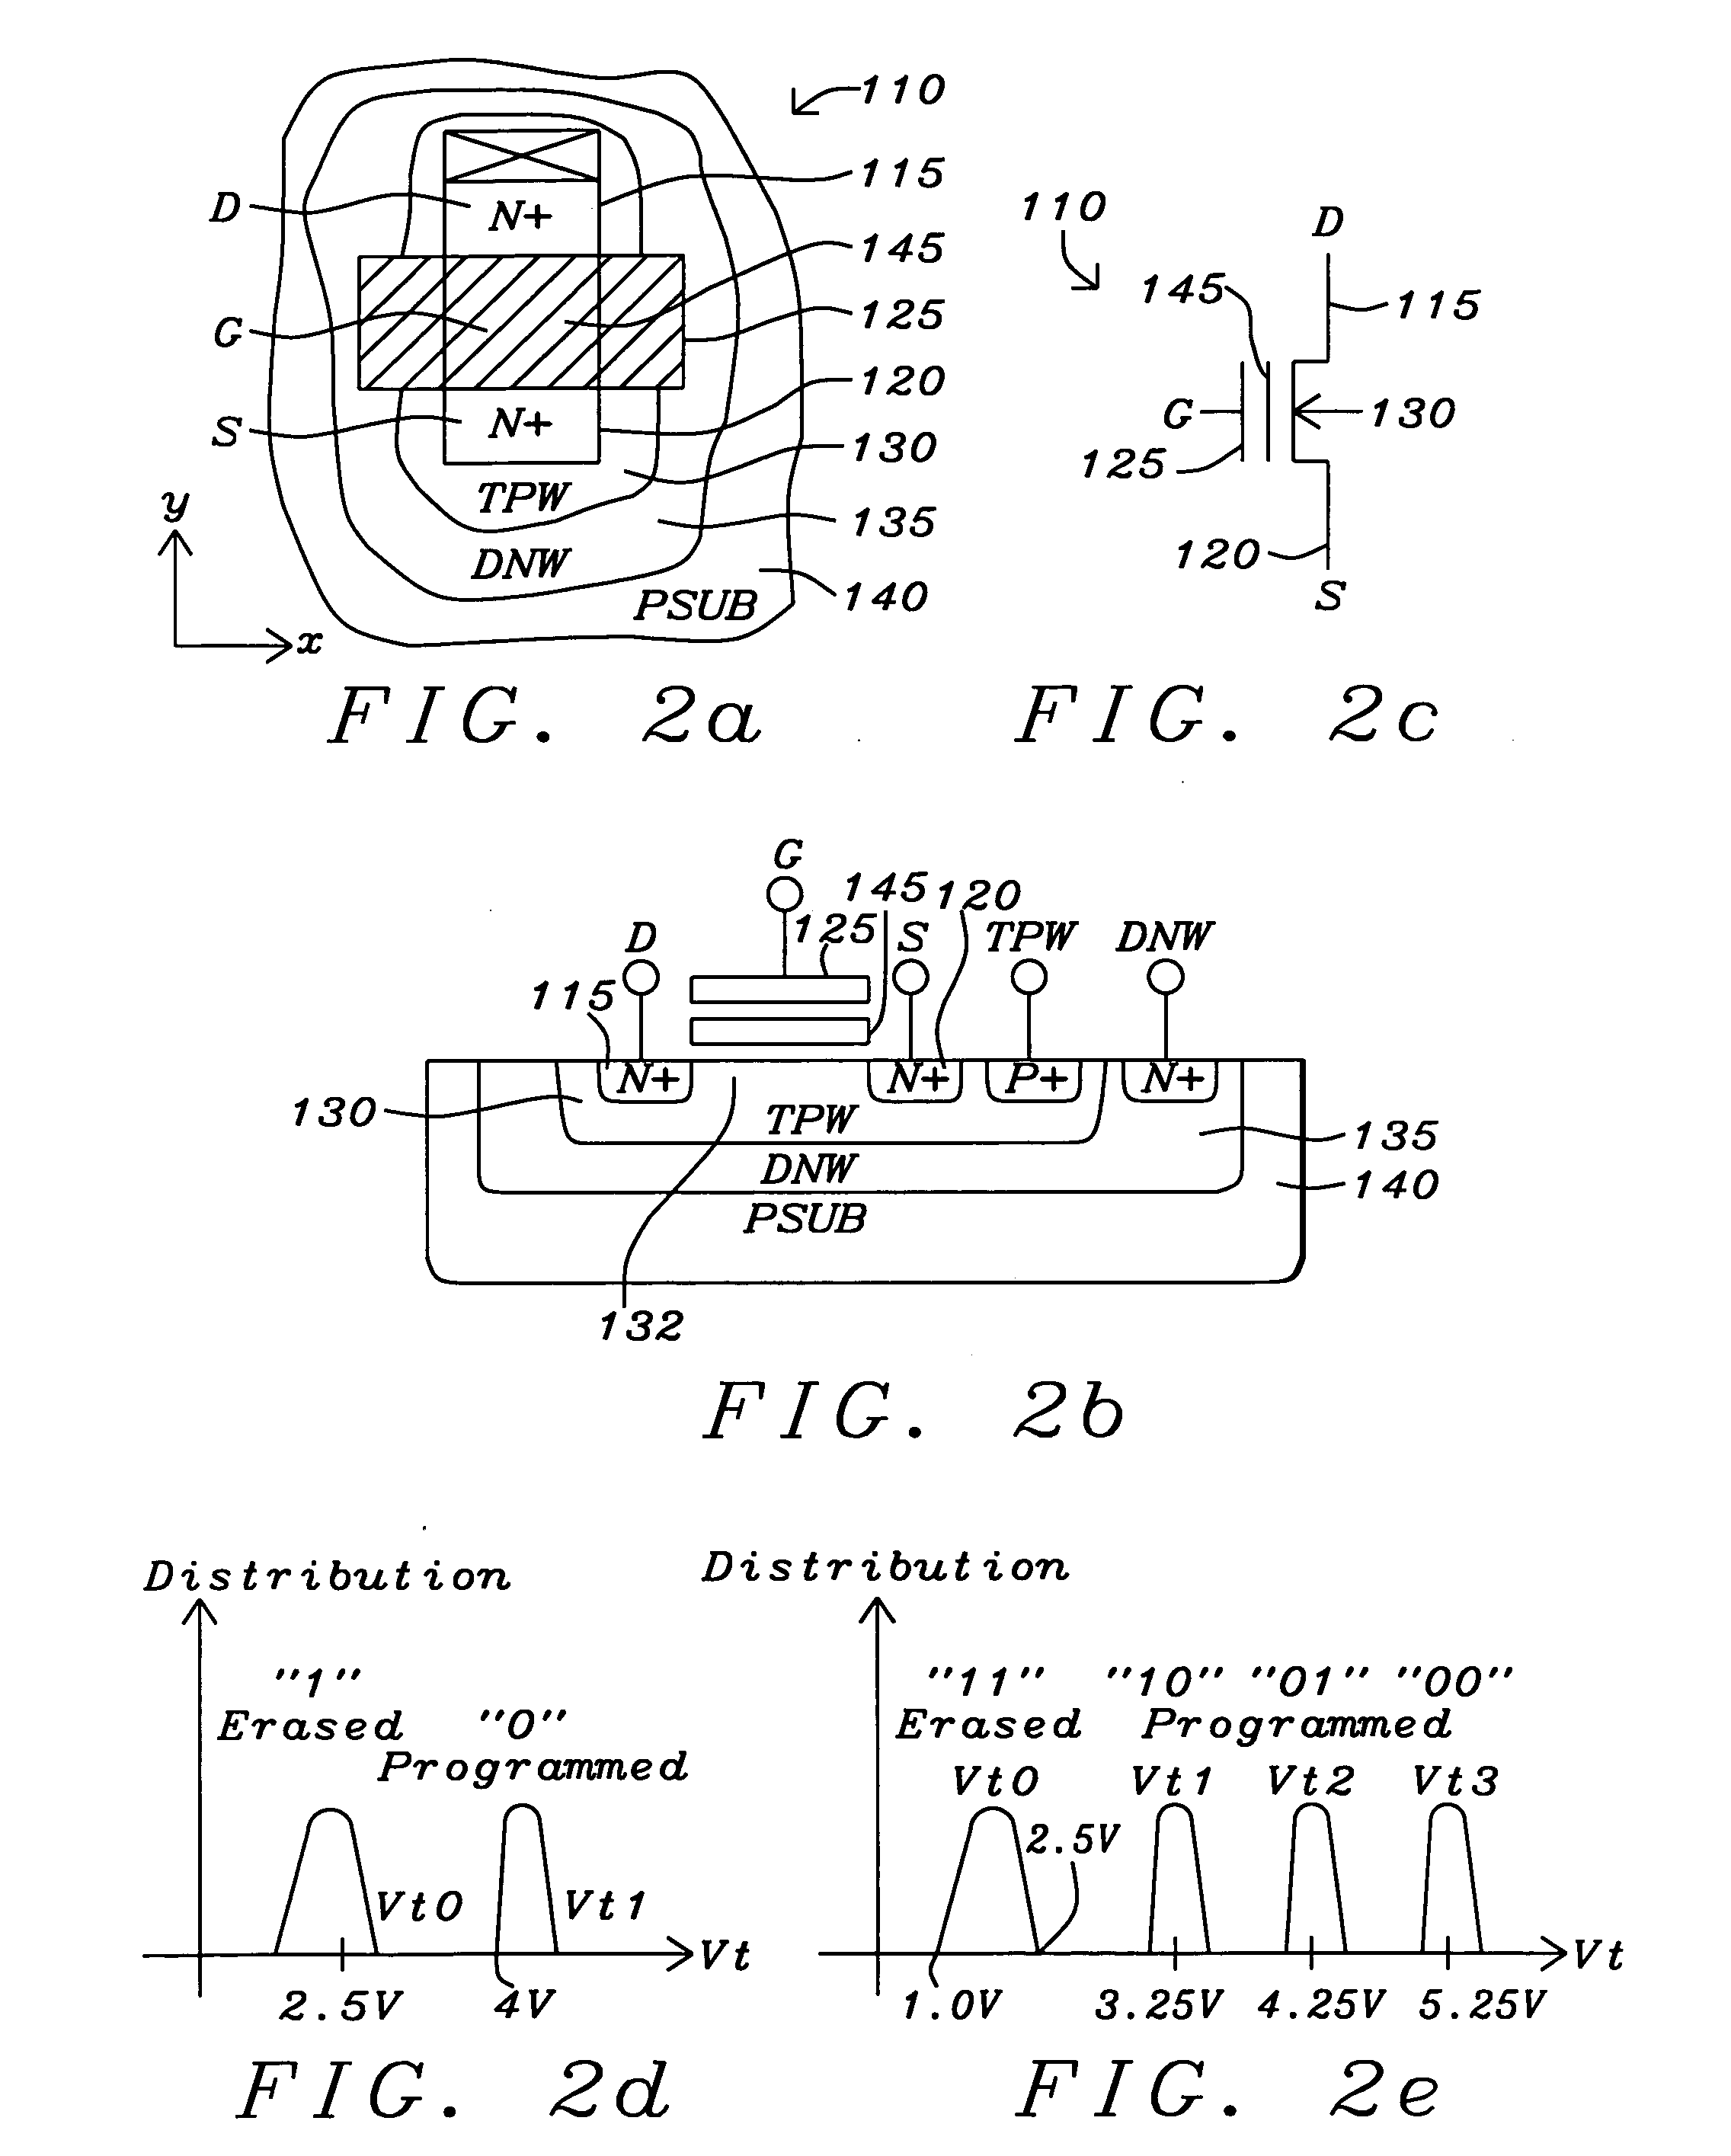 NAND string based NAND/NOR flash memory cell, array, and memory device having parallel bit lines and source lines, having a programmable select gating transistor, and circuits and methods for operating same